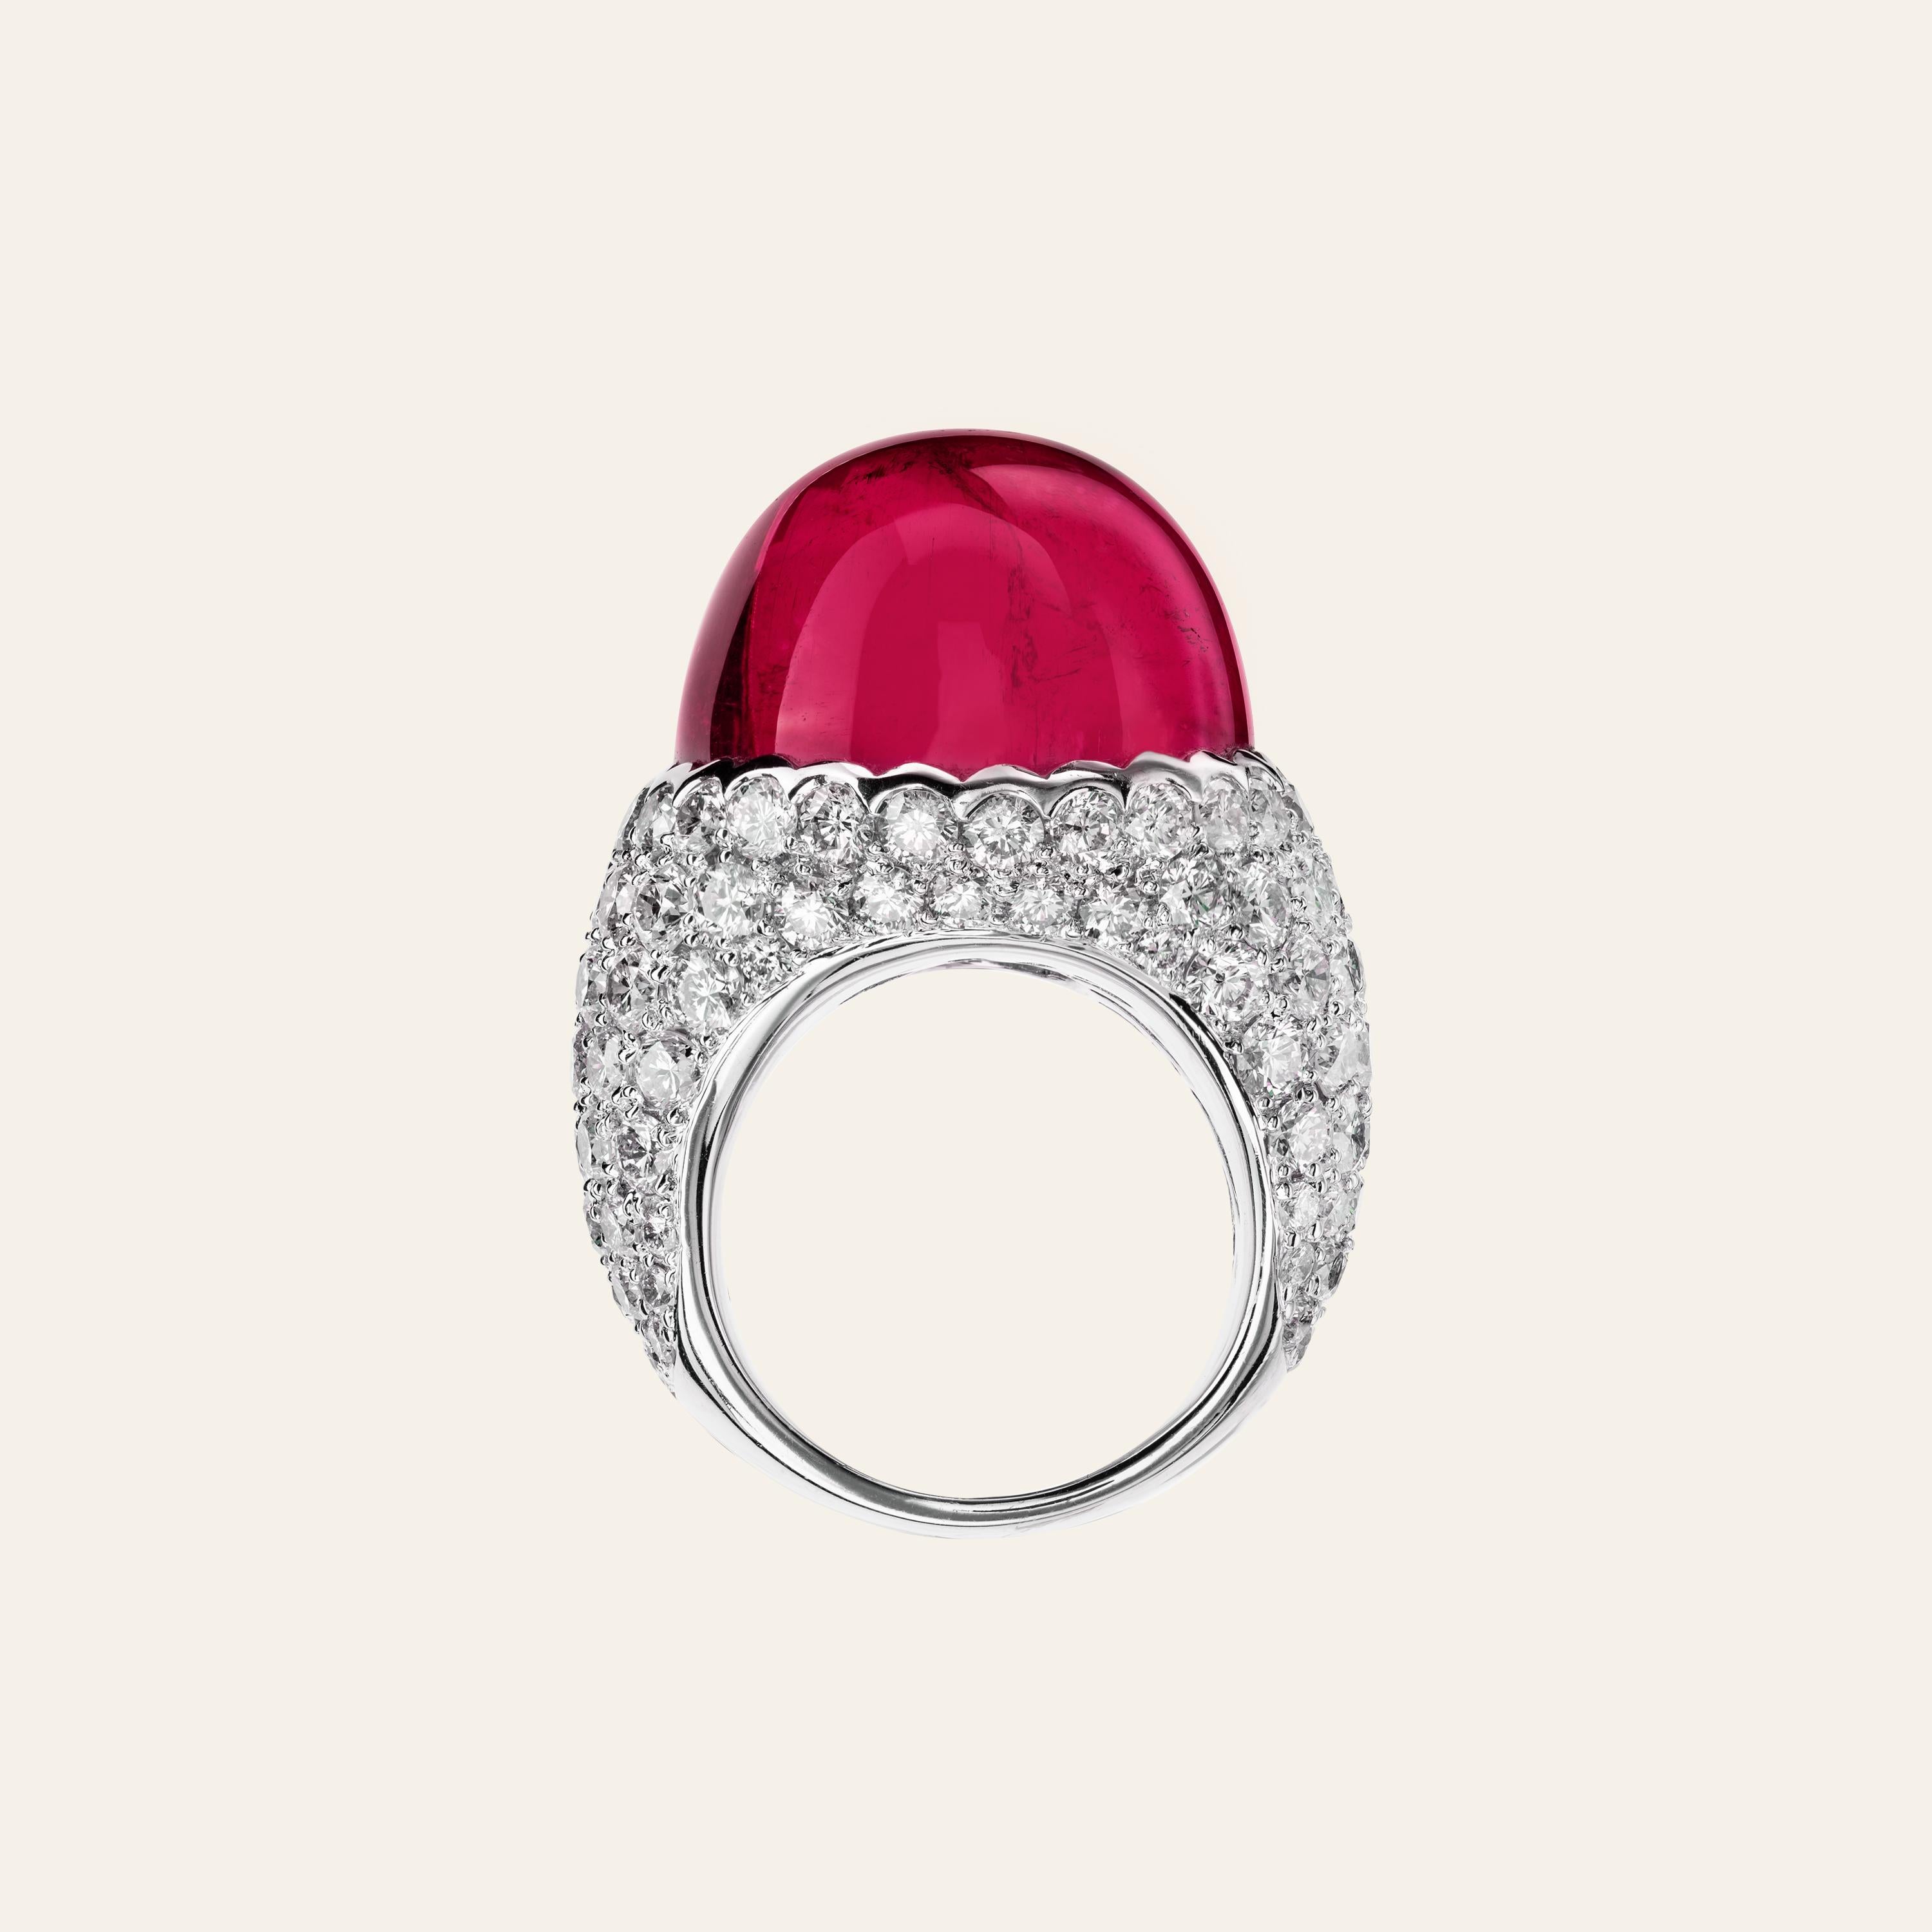 Sabbadini Cocktail Ring With Cabochon Rubelite And Diamonds
18k White gold ring, oval cut cabochon rubelite 56,83 and round cut diamonds 9,08ct. Gold 17,14gr
Hand made jewelry & designed in Milan, in Via Montenapoleone.
This item comes directly from